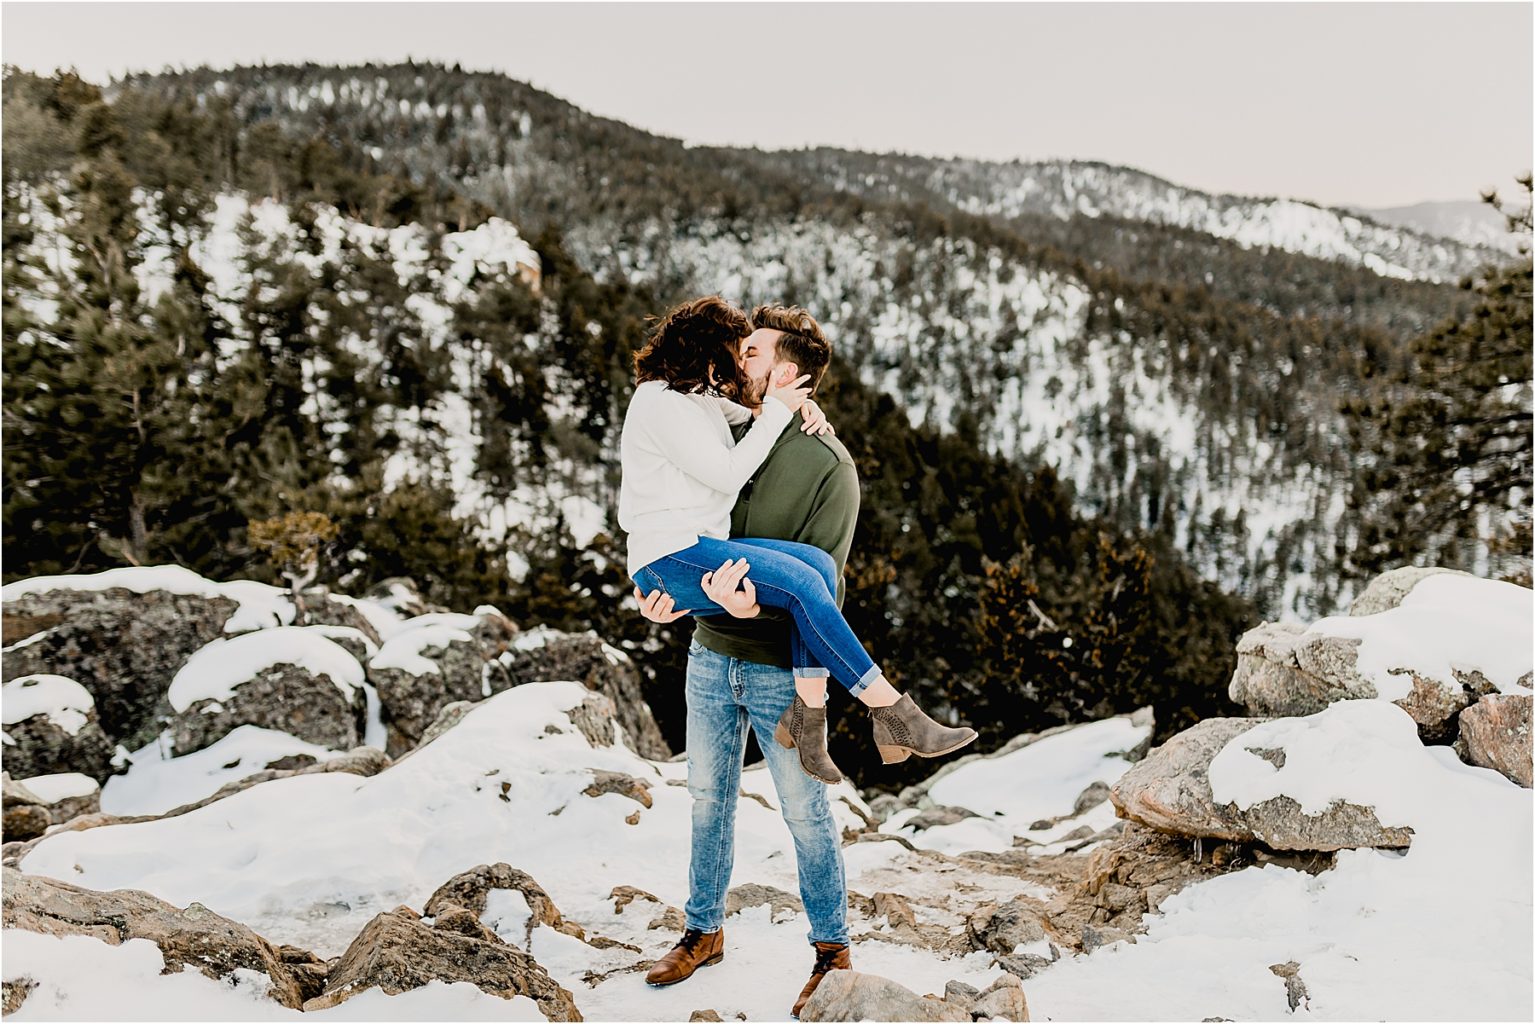 beautiful colorado engagement session in the snow covered trees and mountains